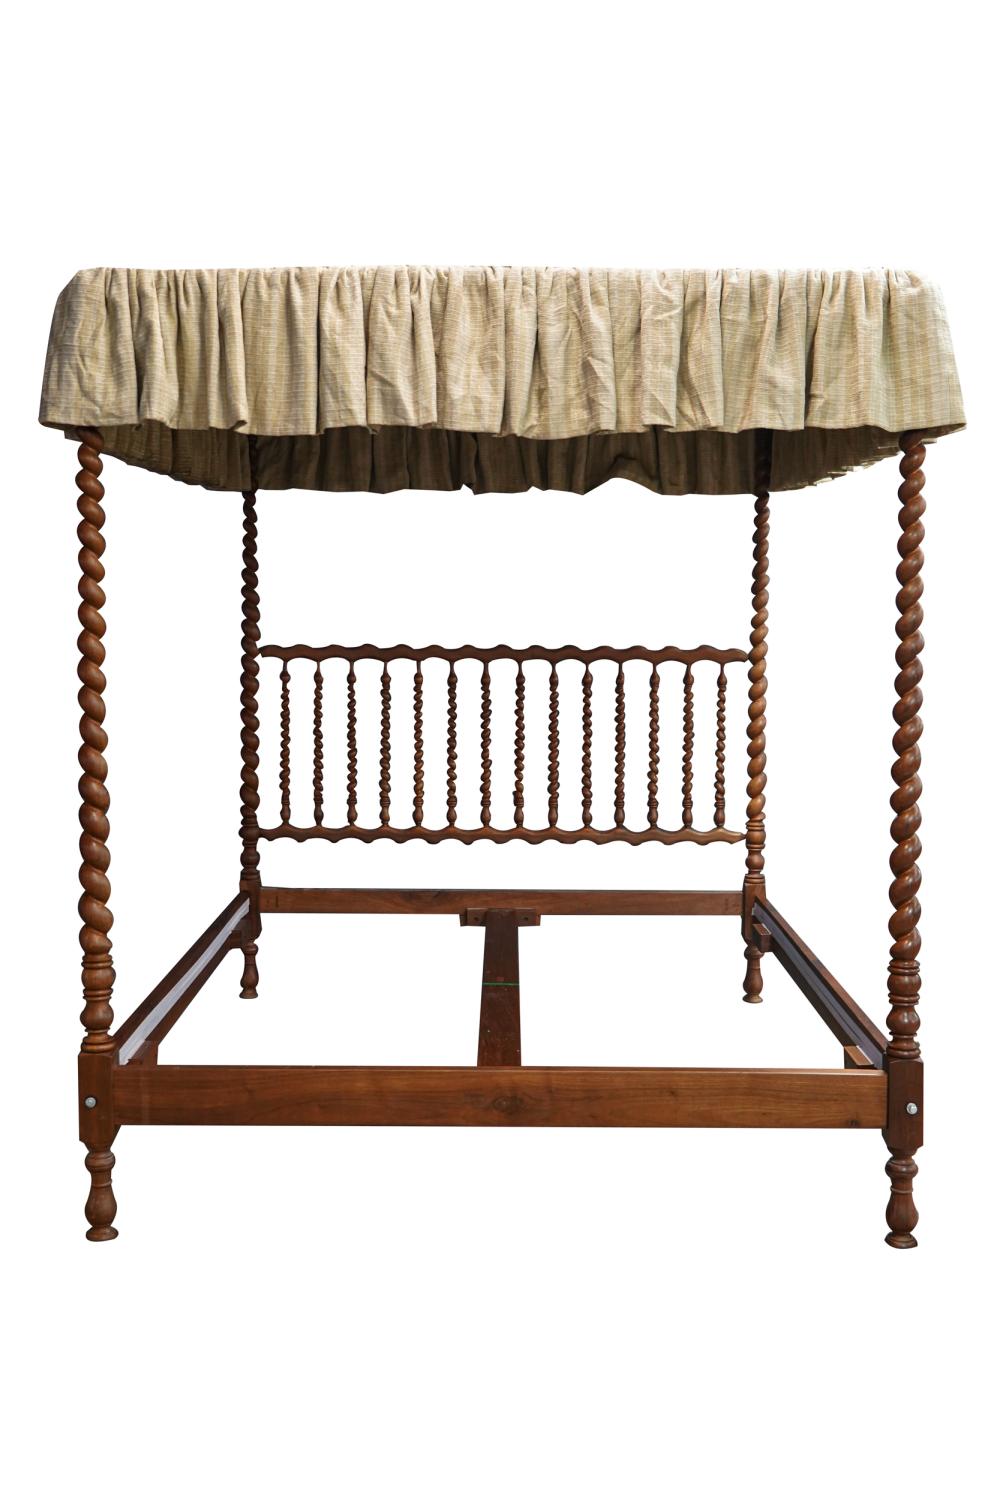 CARVED & TURNED WOOD CANOPY BEDCondition: